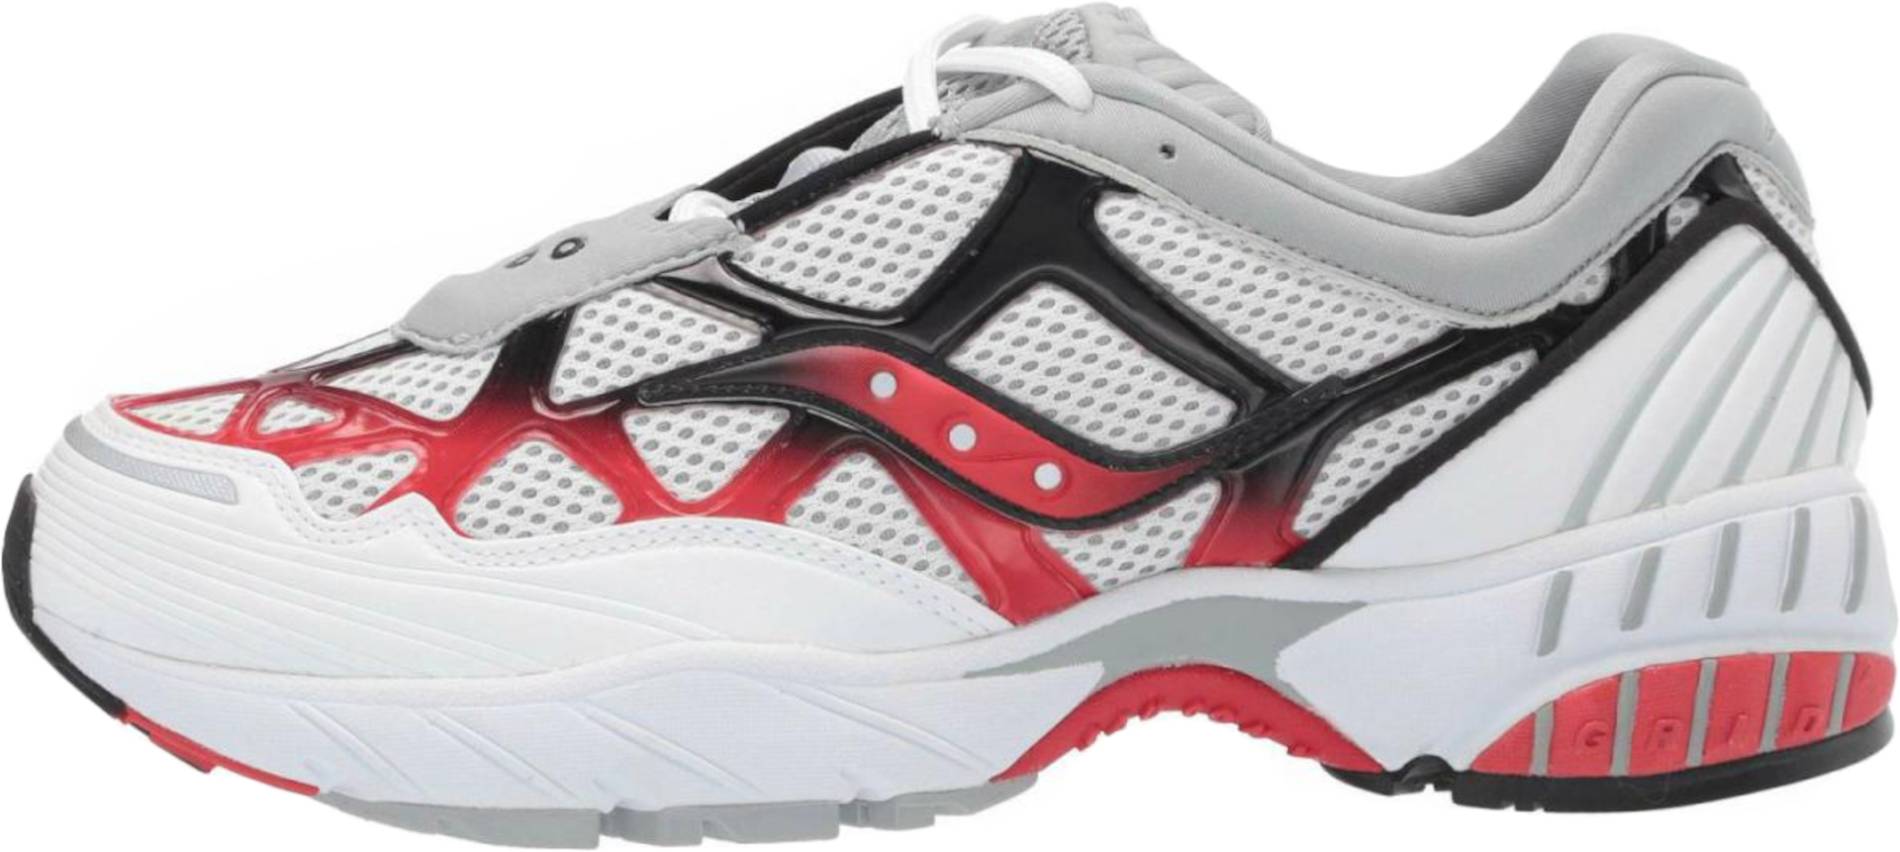 Saucony Grid Web sneakers in white (only $43) | RunRepeat